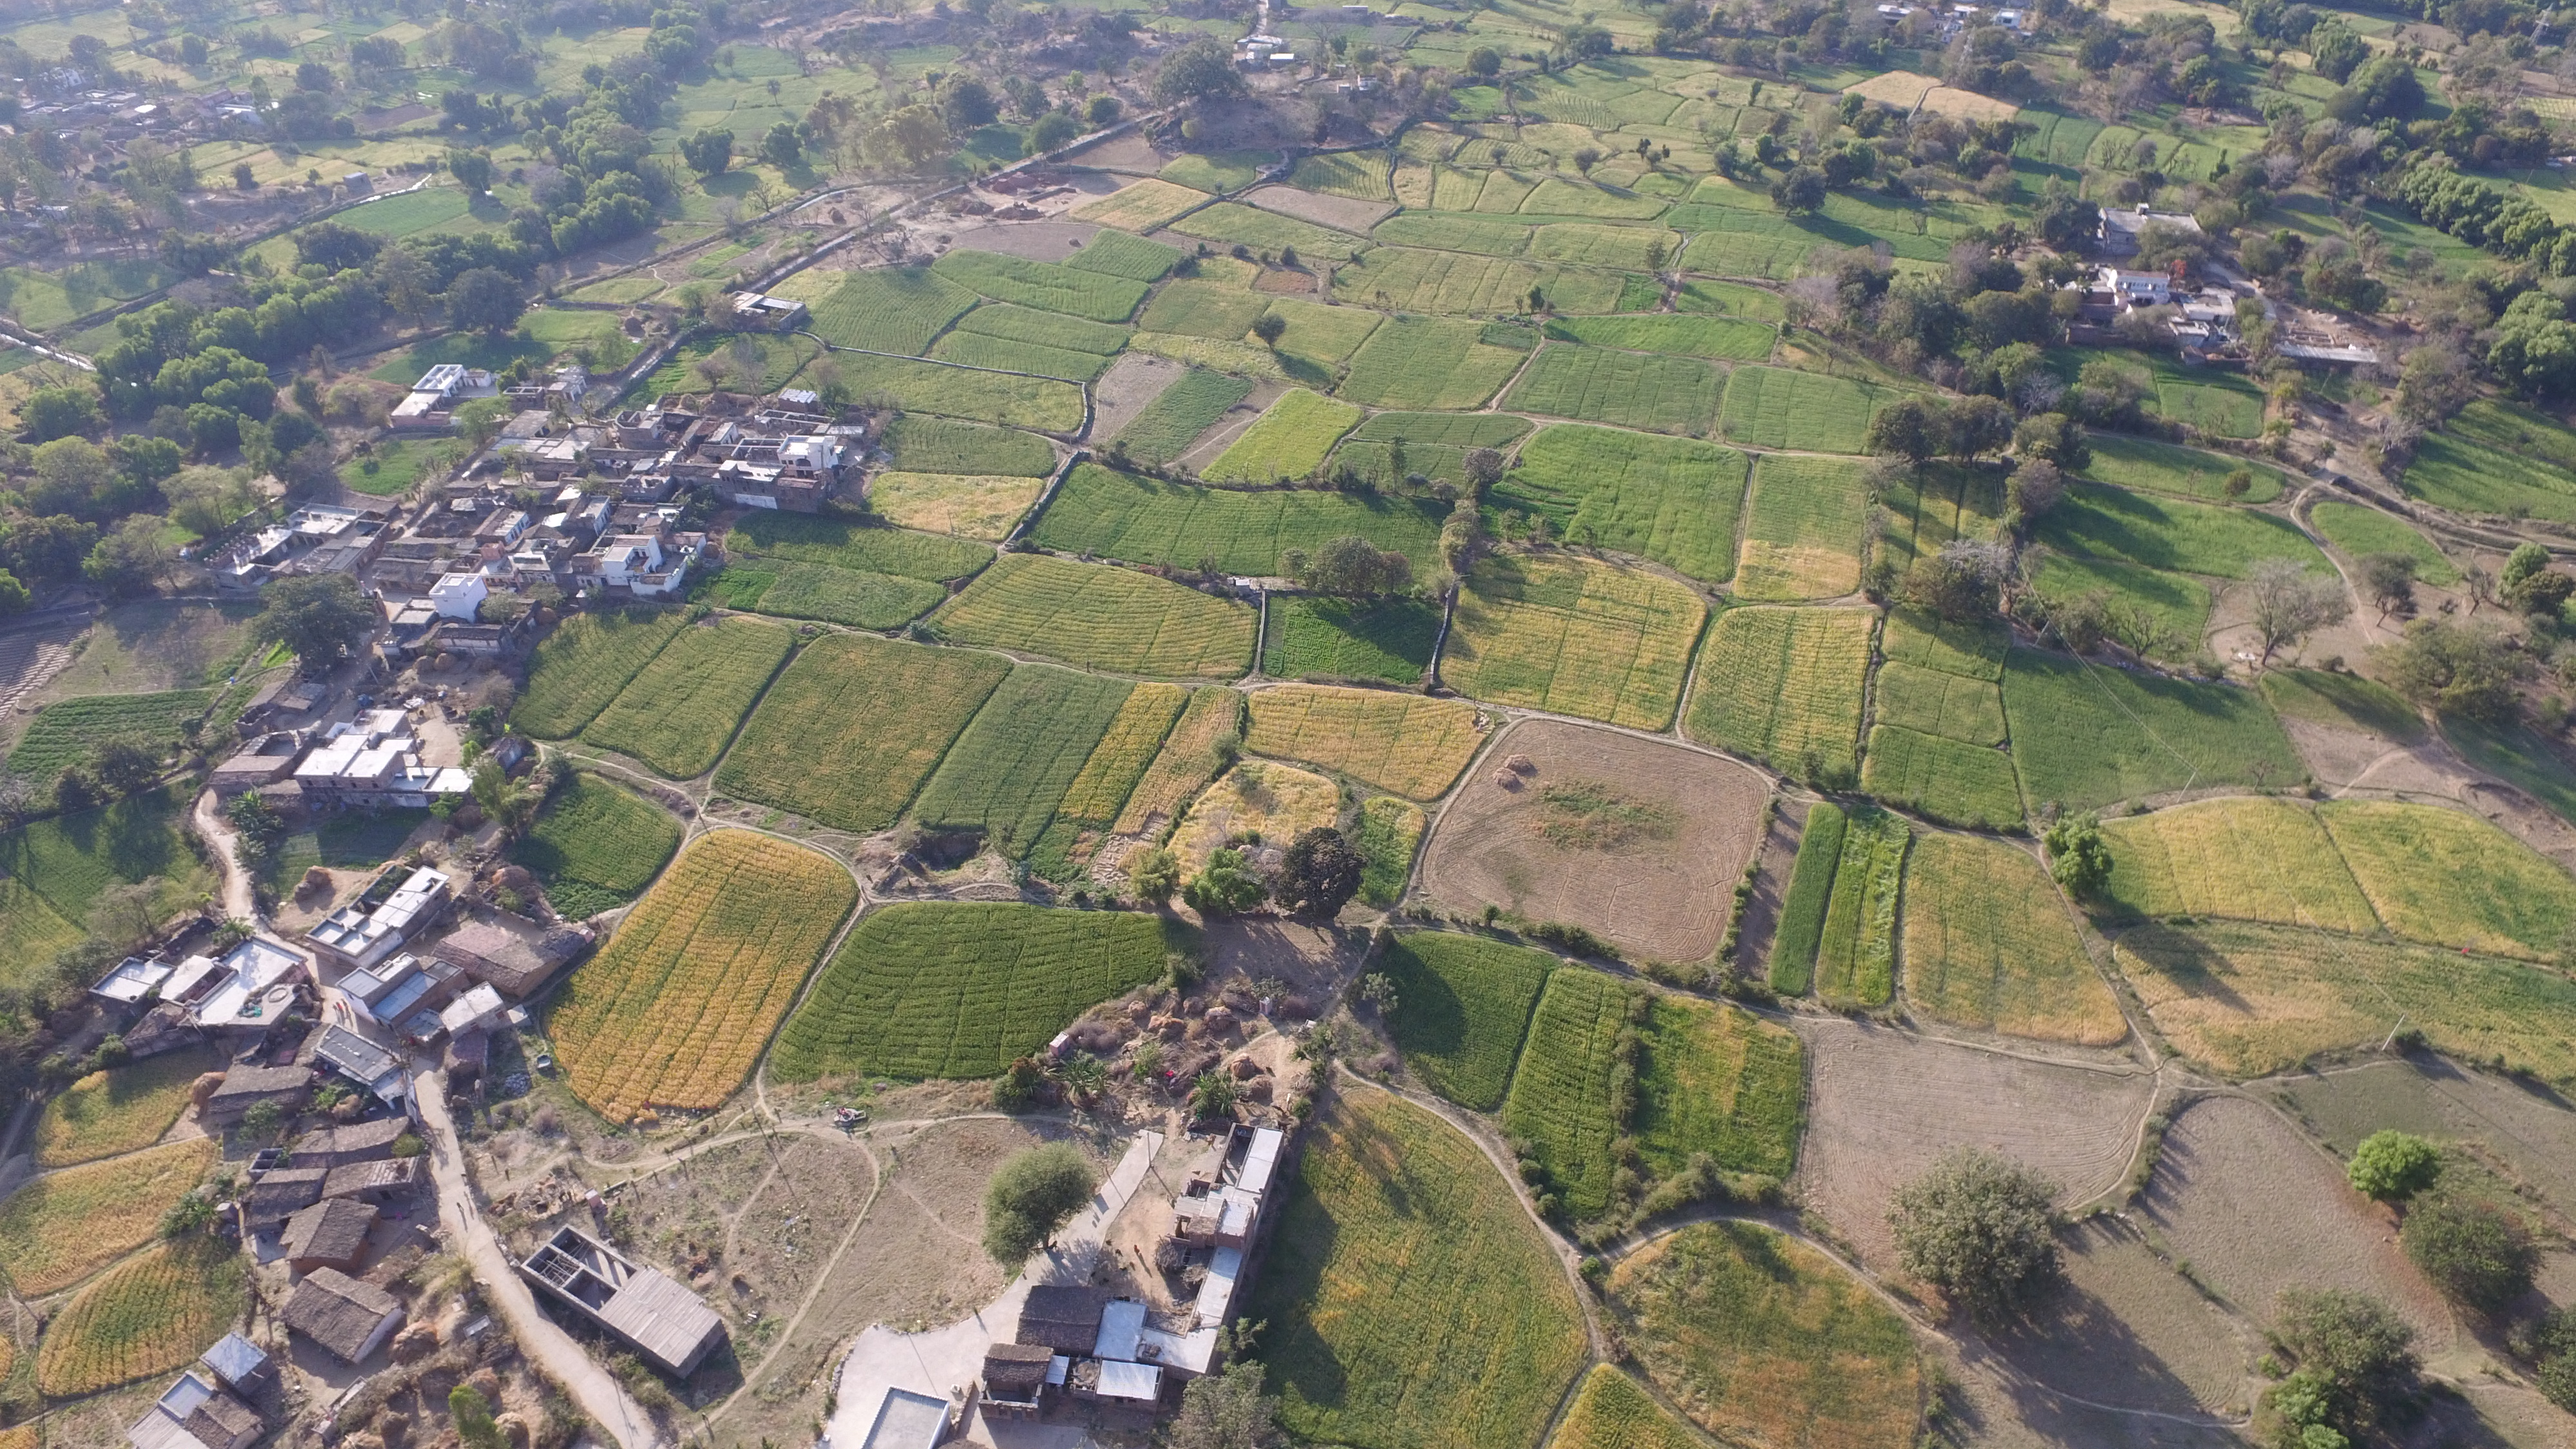 A view of the agricultural fields in Kumbharwadi village, post watershed development (Image: WOTR)